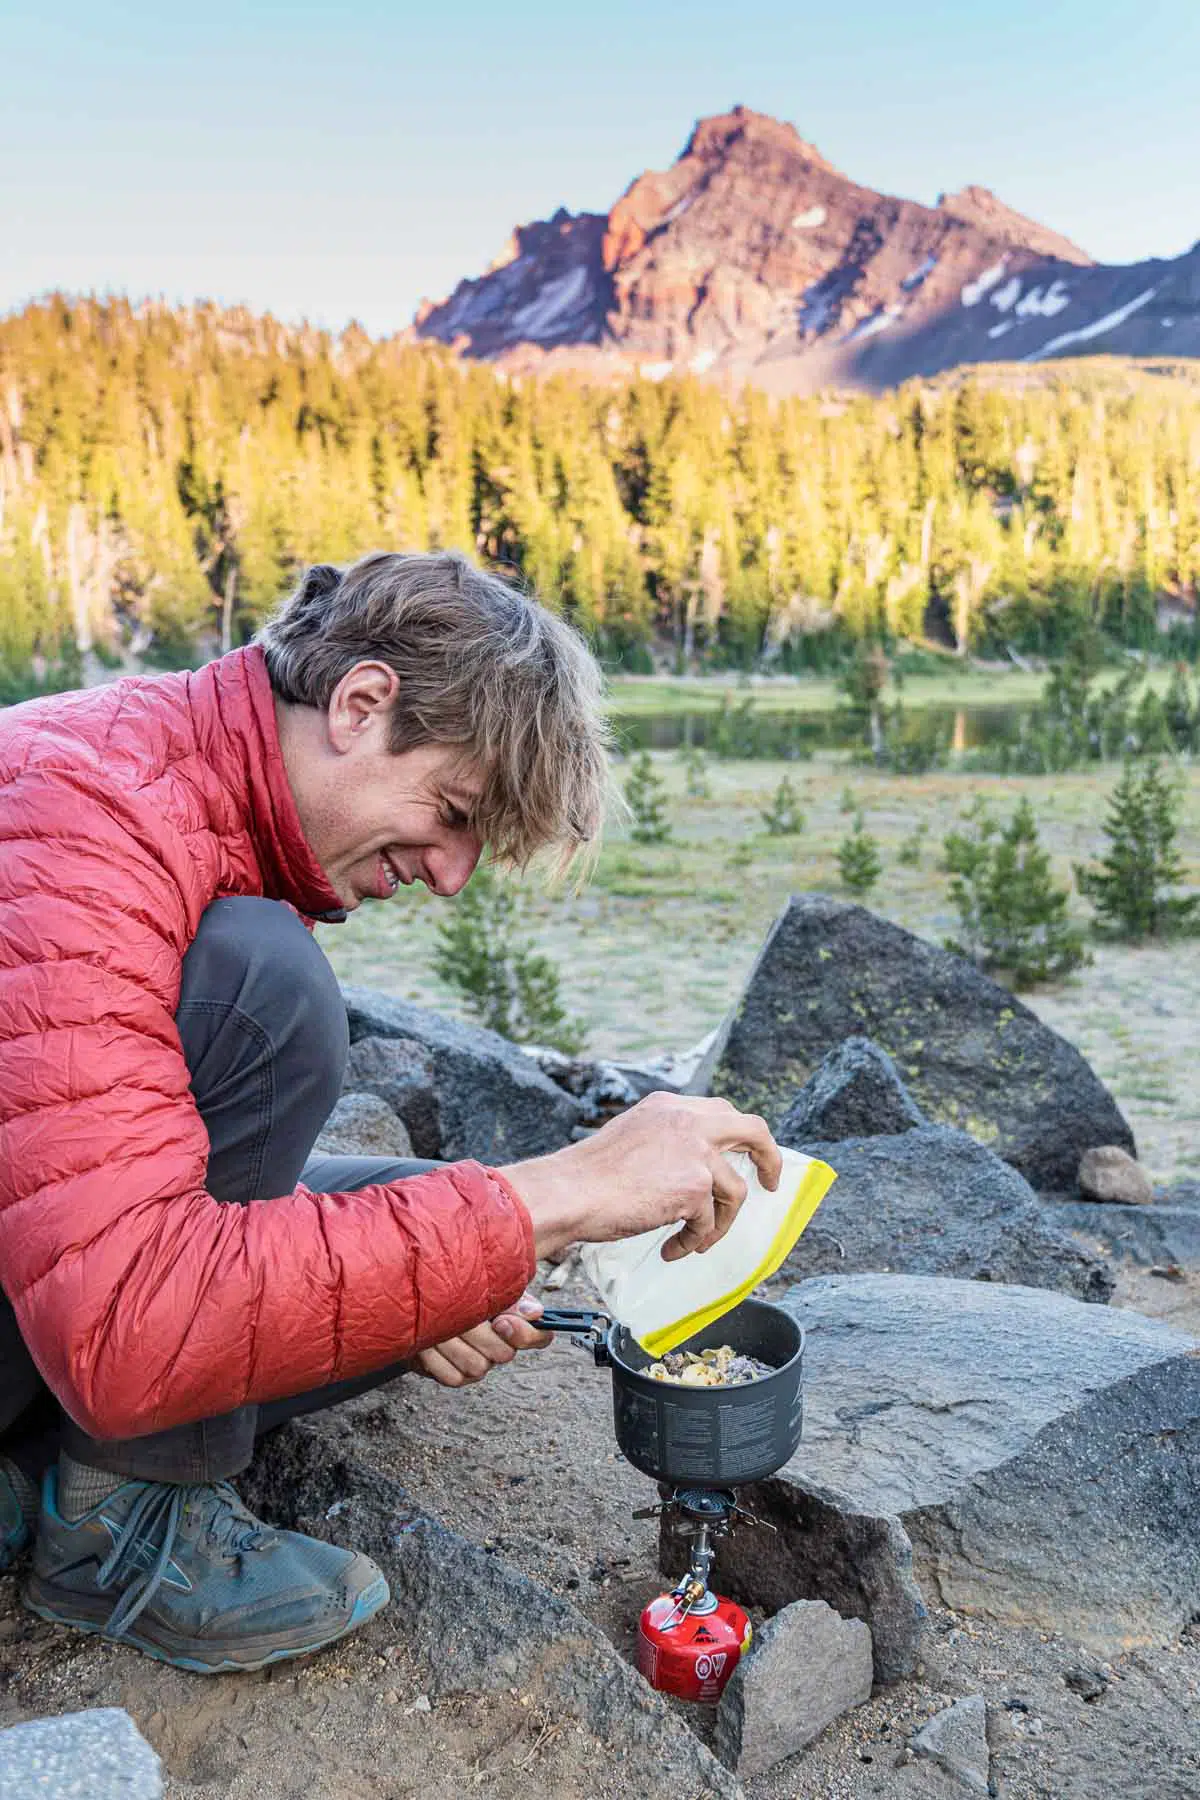 Michael adding food to a backpacking pot. There is a forest and mountain peak in the distance.